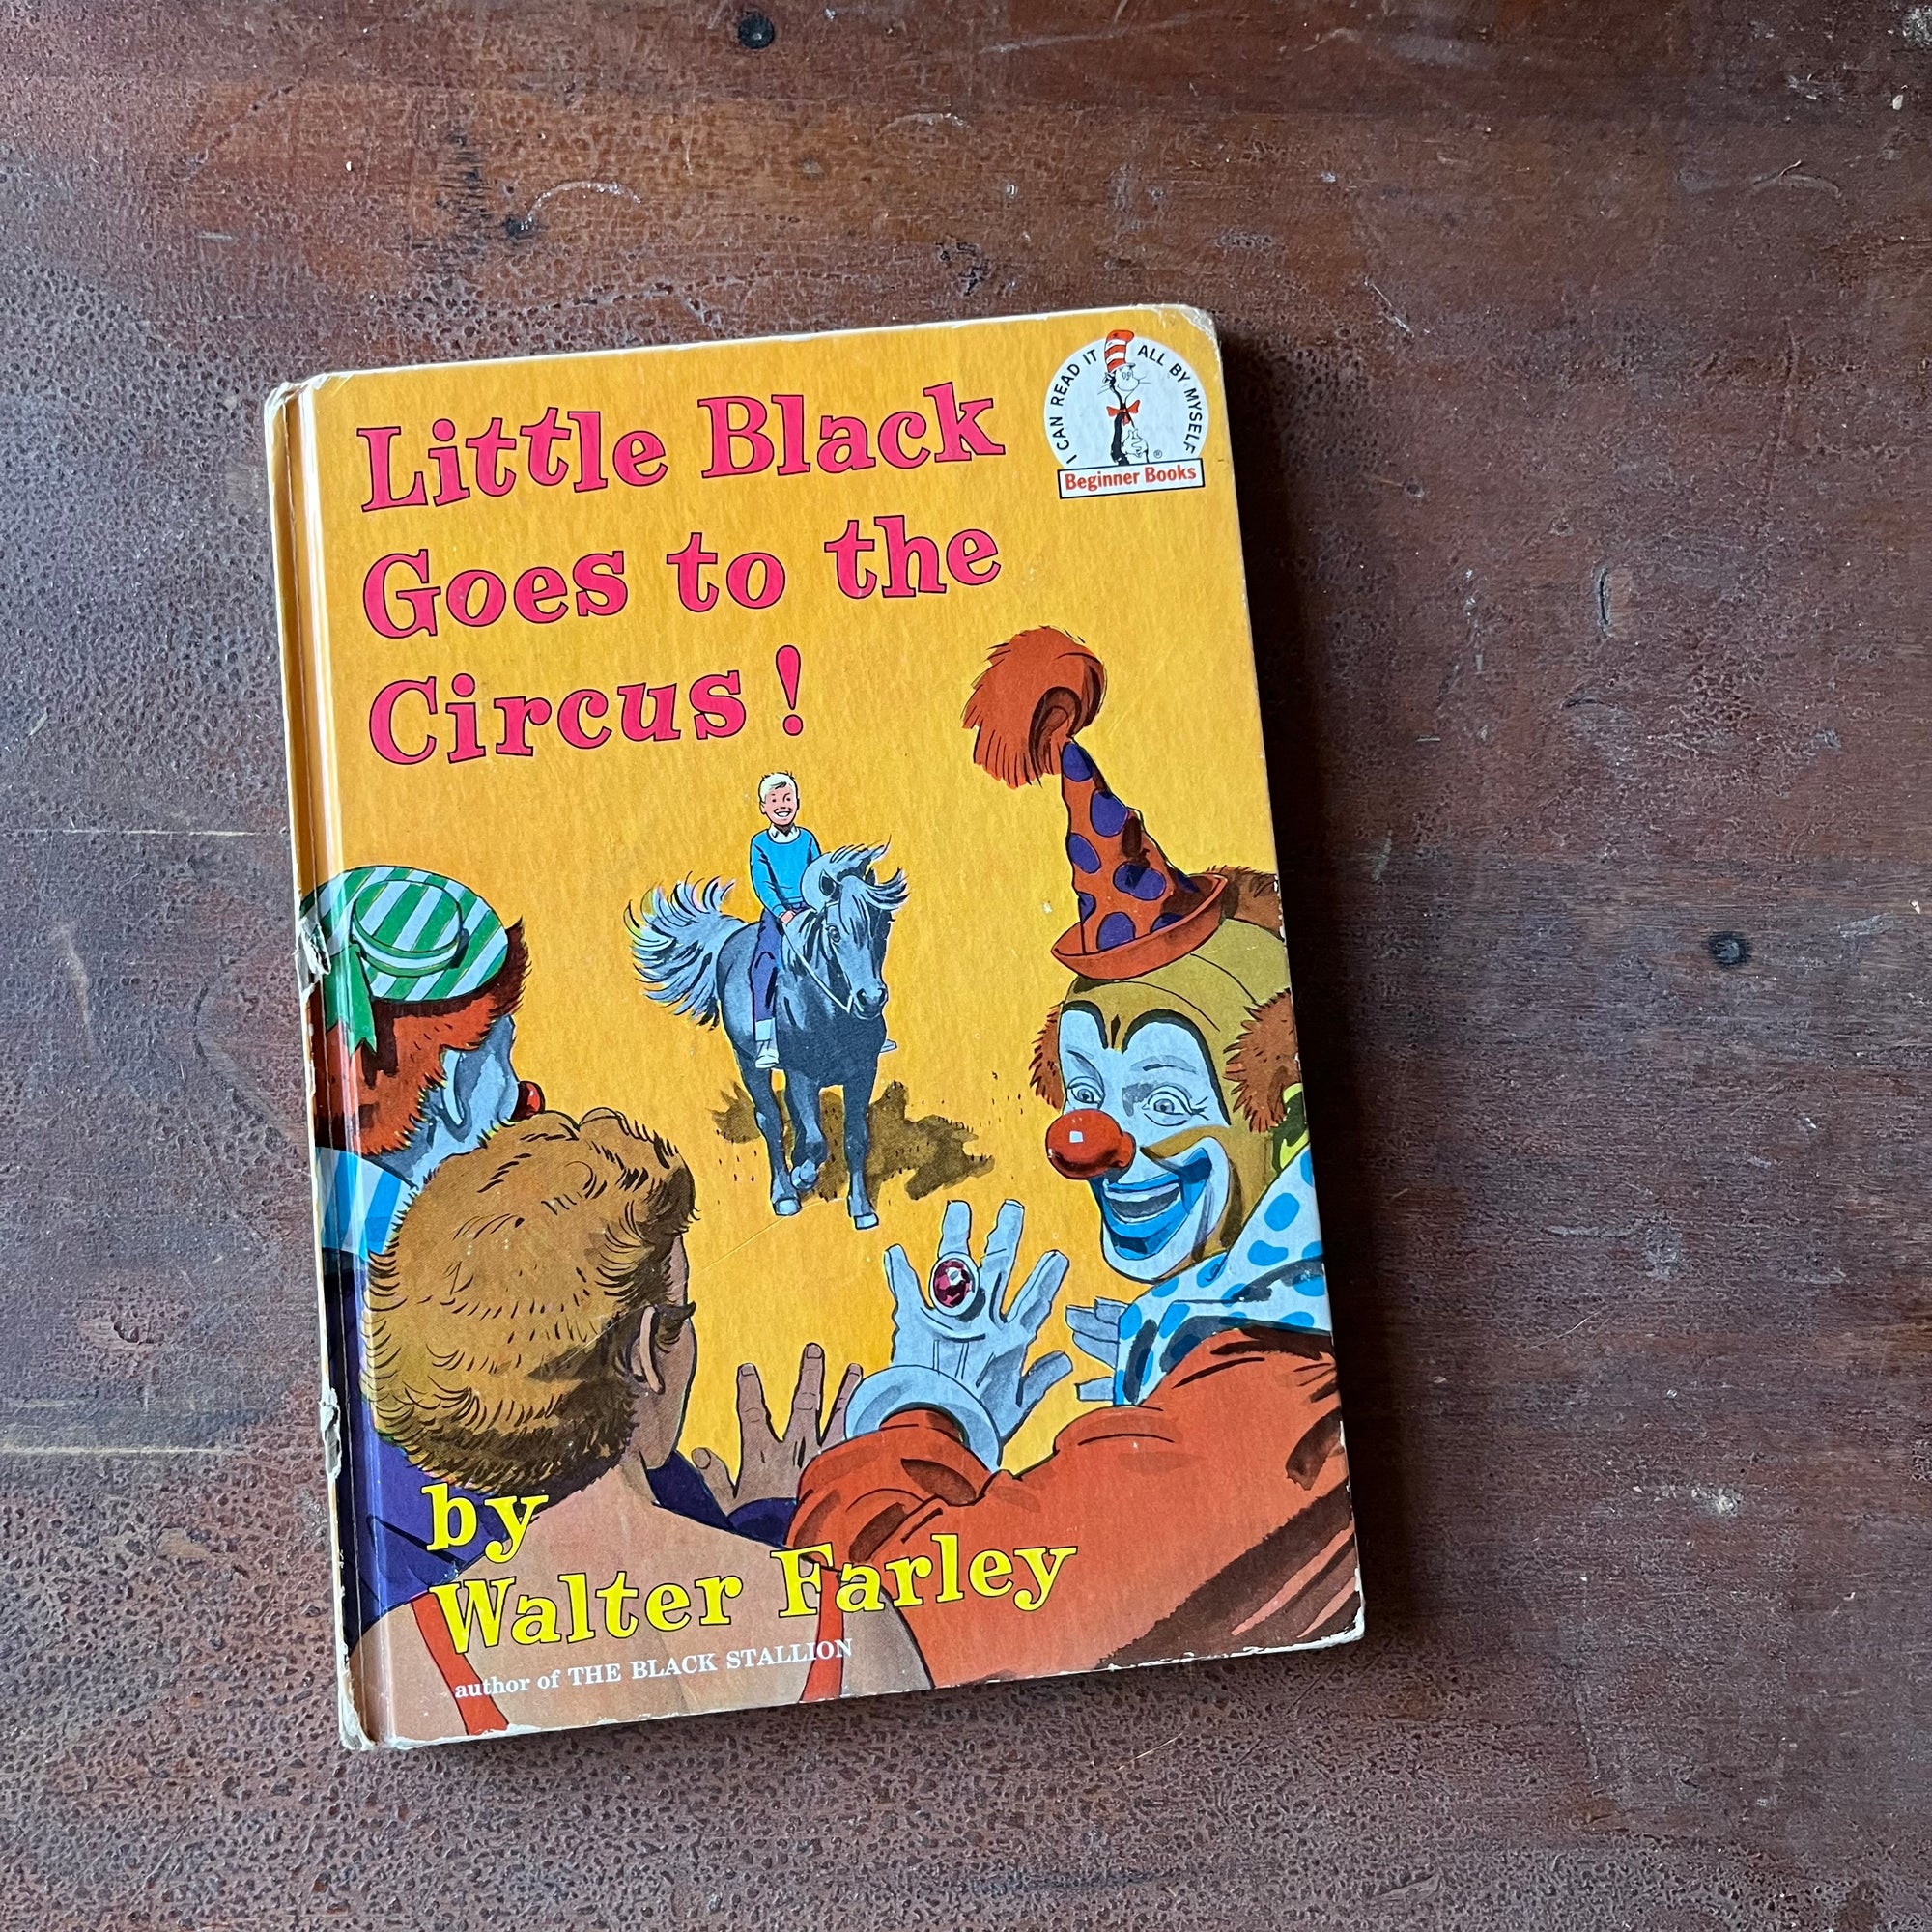 Log Cabin Vintage - vintage children's book, children's book, picture book, I Can Read It All By Myself Beginner Books – Little Black Goes to the Circus by Walter Farley with illustrations by James Schucker - view of the front cover